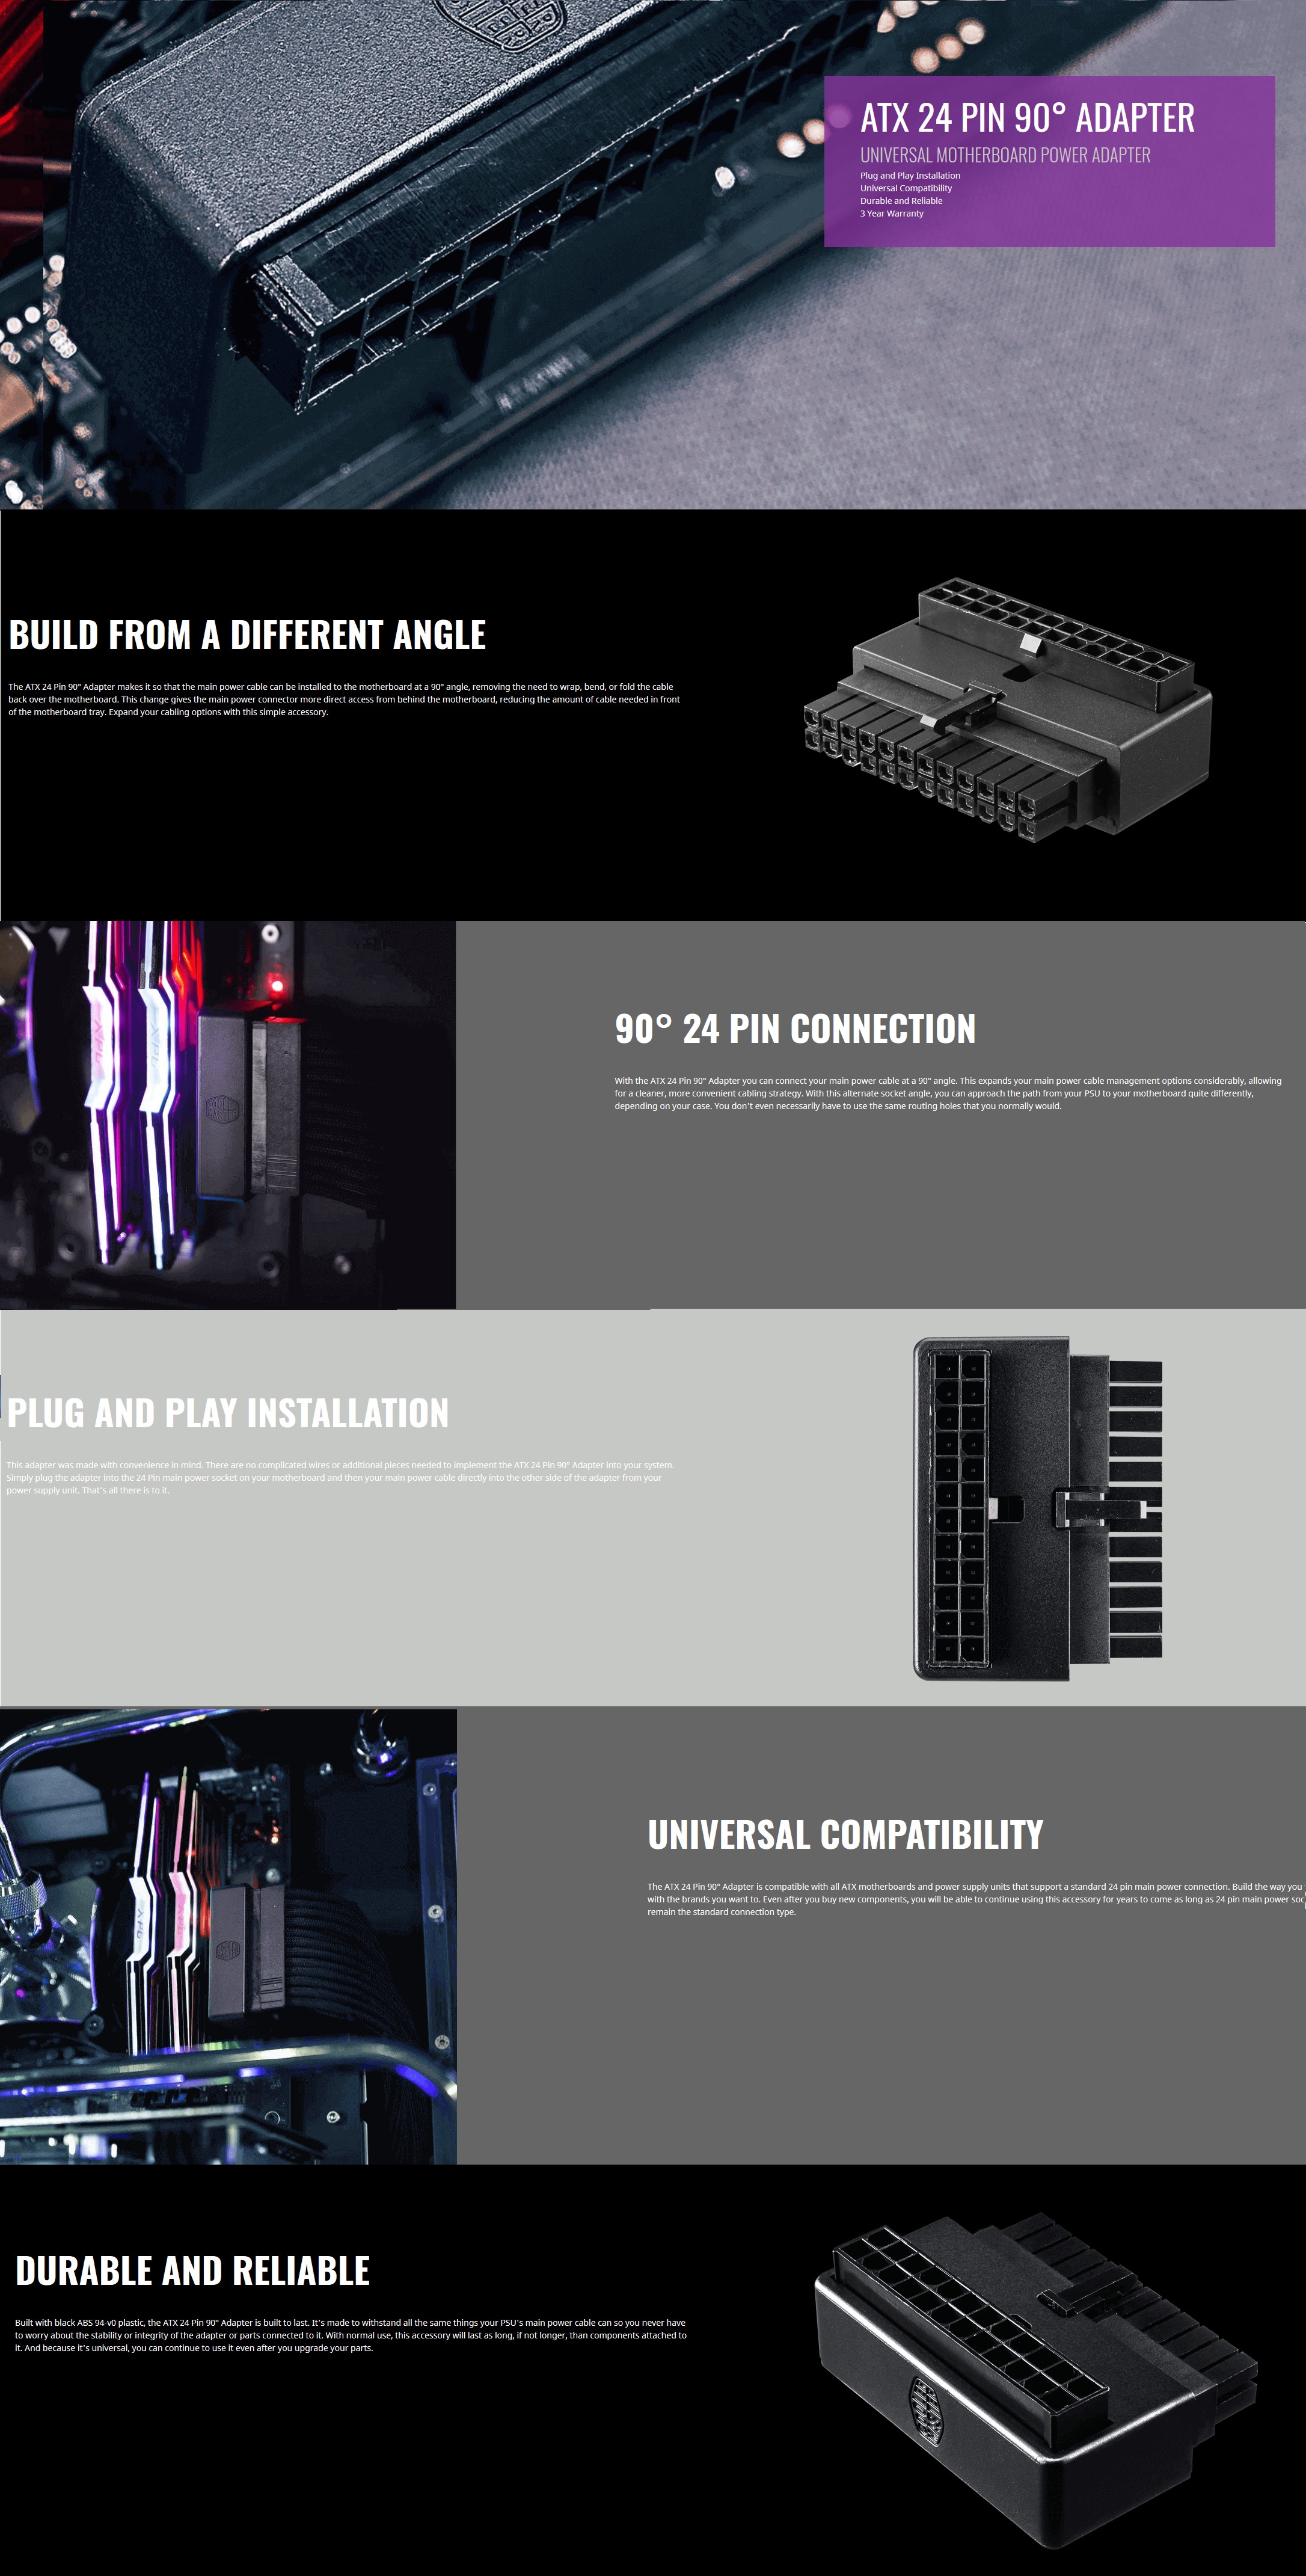 A large marketing image providing additional information about the product Cooler Master 24-Pin ATX 90 Degree Adapter - Additional alt info not provided